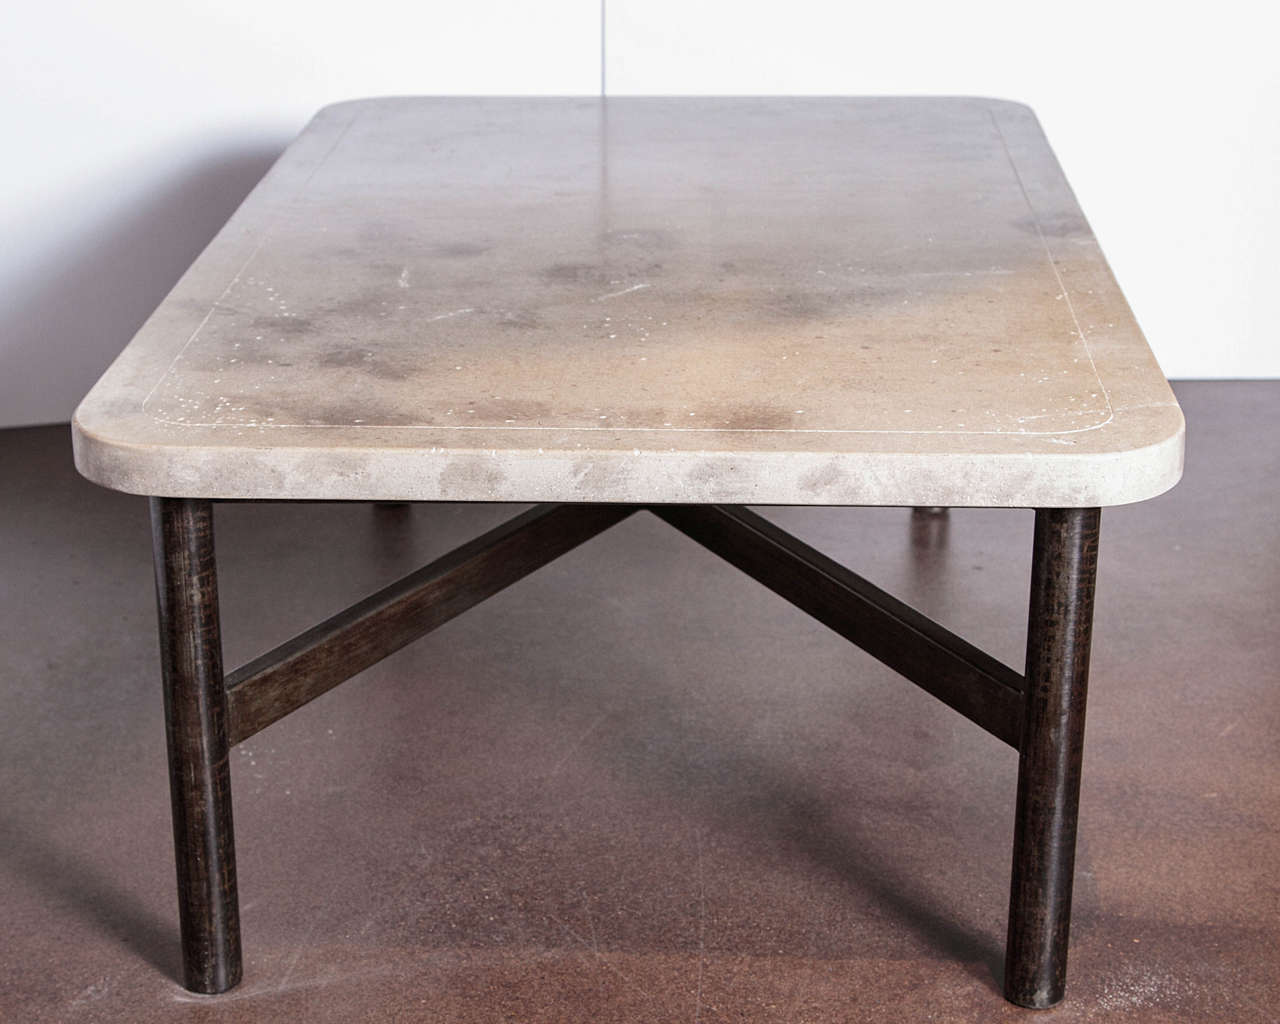 Transitional coffee table steel base with limestone top.